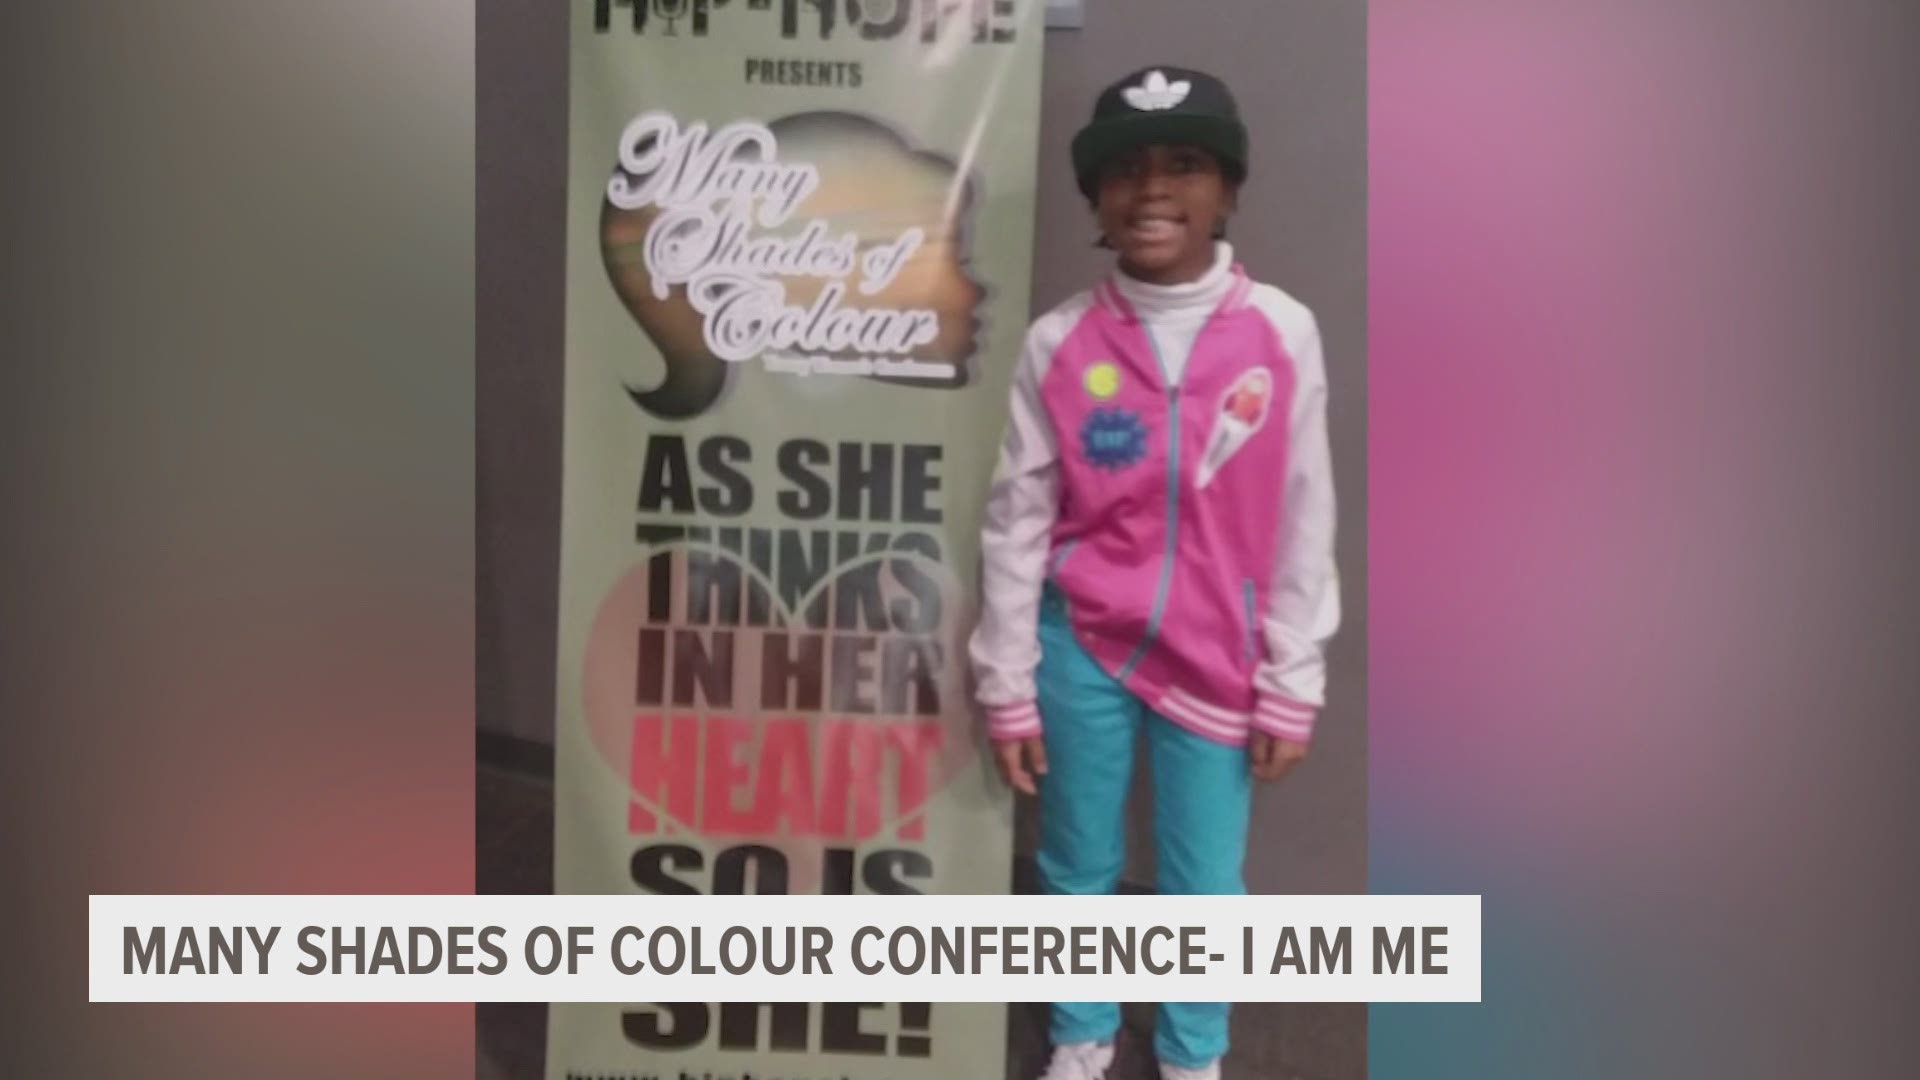 A full circle moment for a young lady who went from attendee to presenter